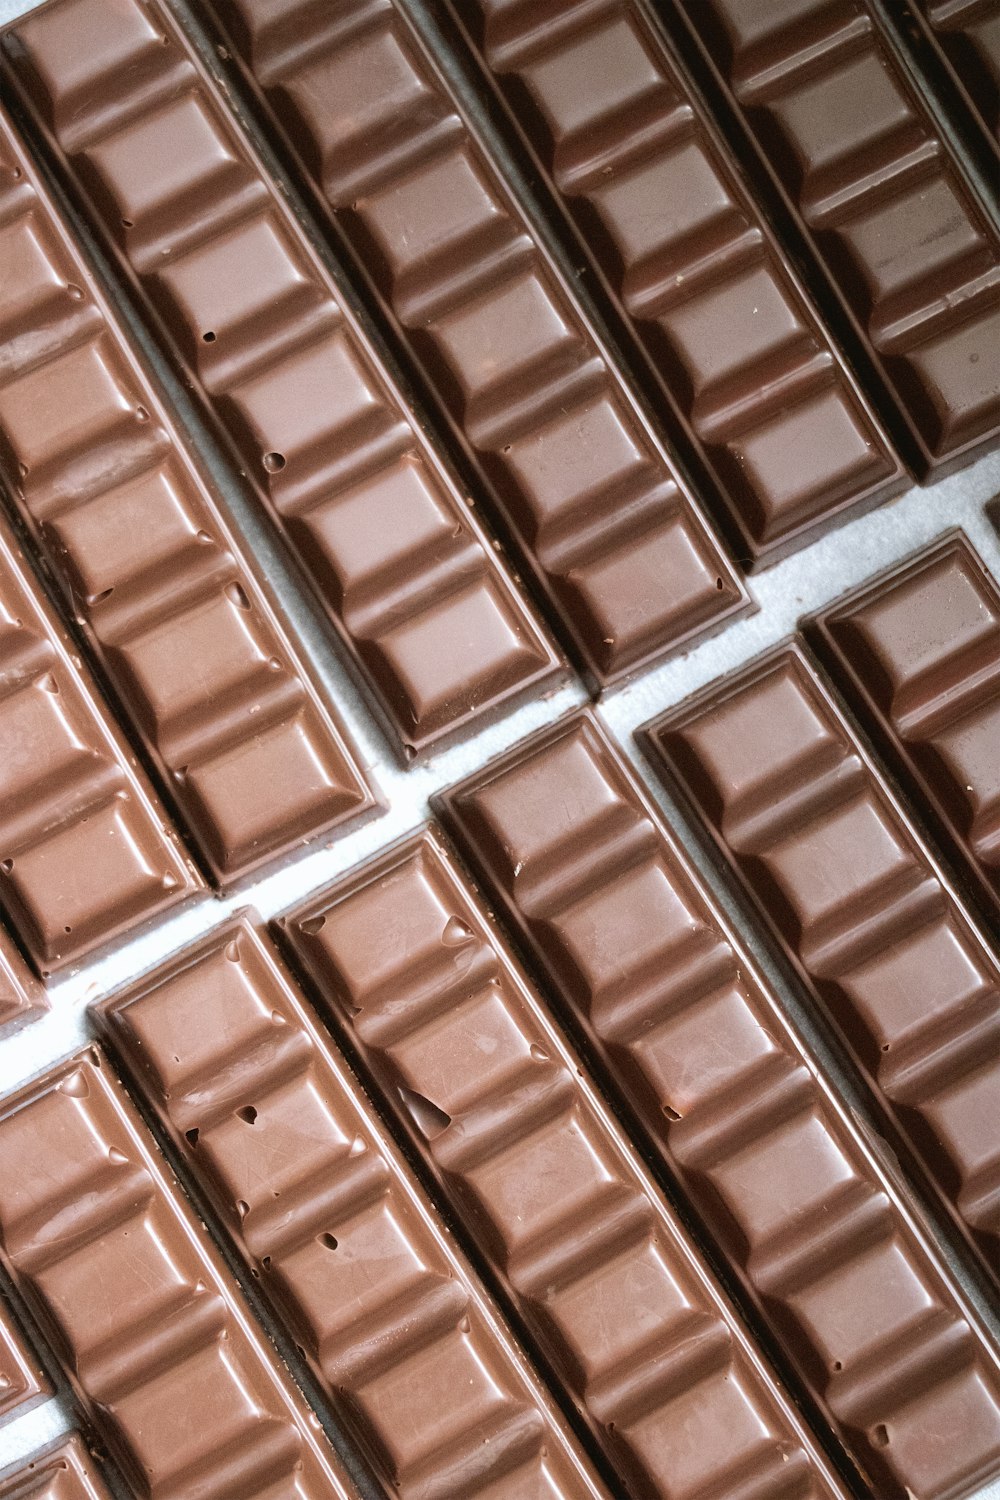 several rows of chocolate bars lined up on a table